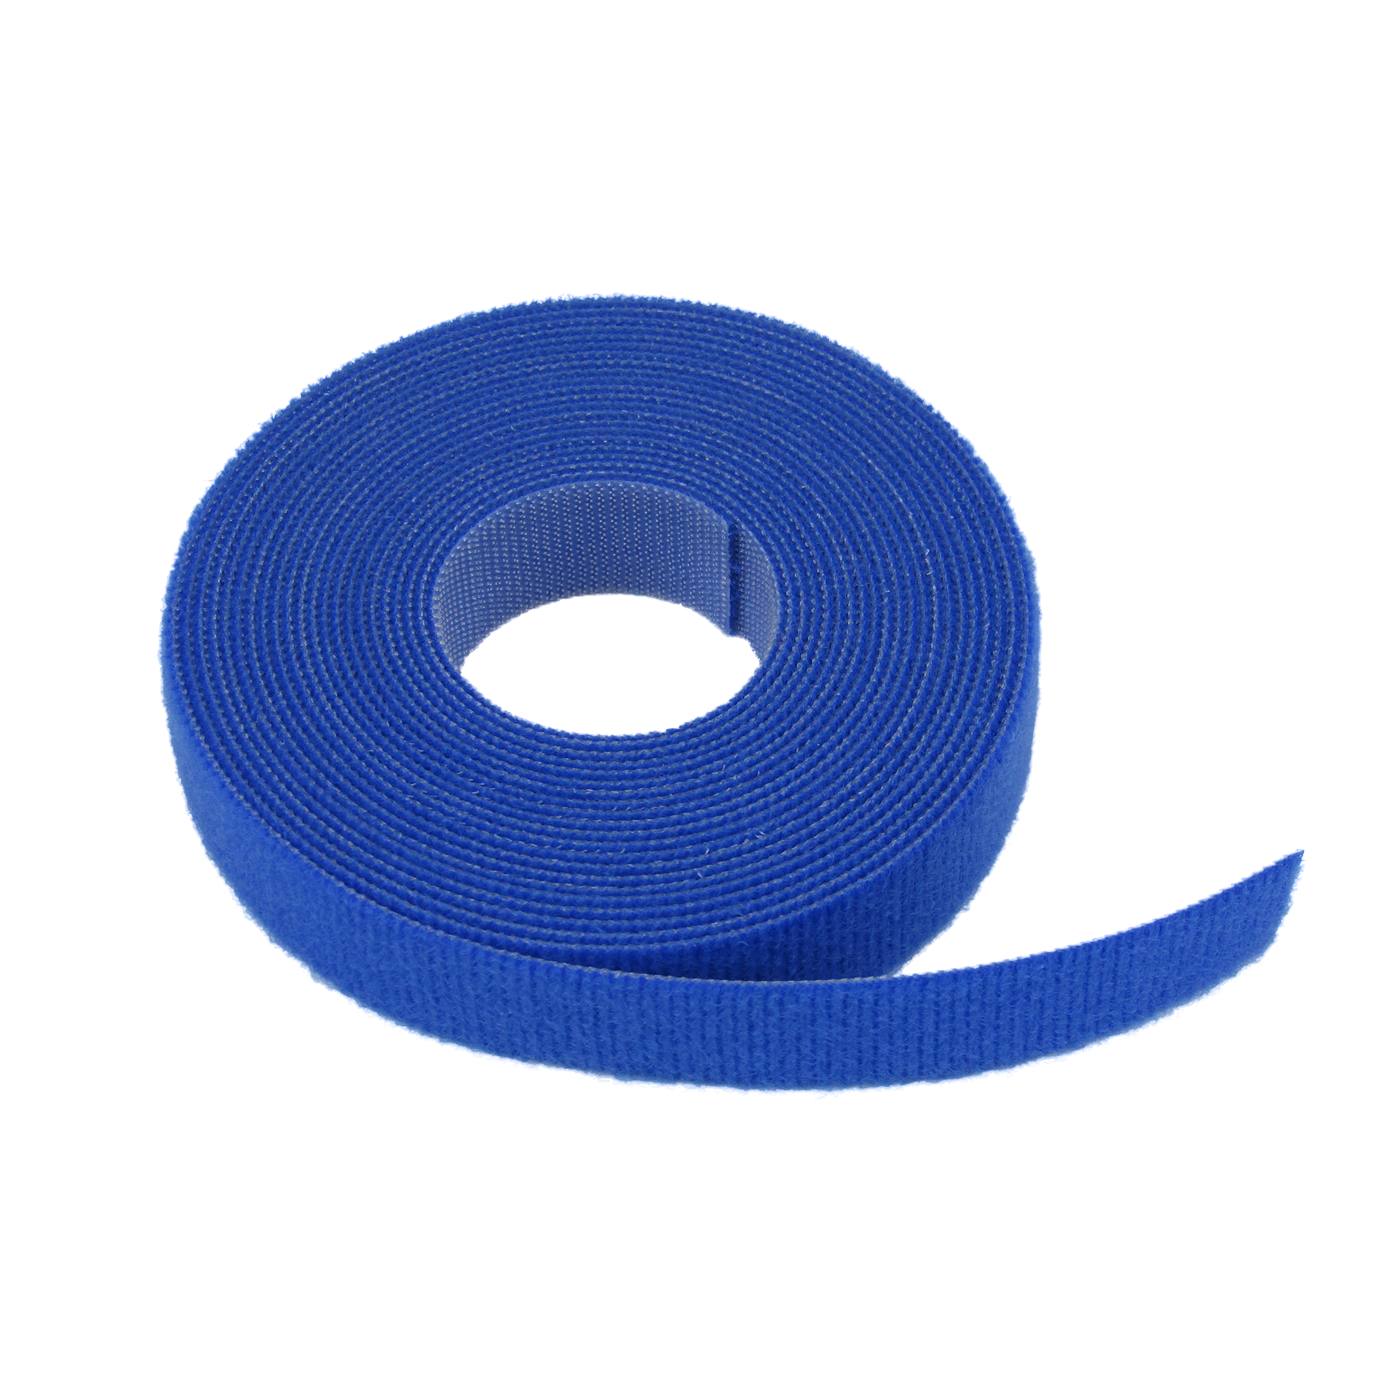 VELCRO® Brand Adhesive Tape 1/4 x 25 yard roll sold by INDUSTRIAL